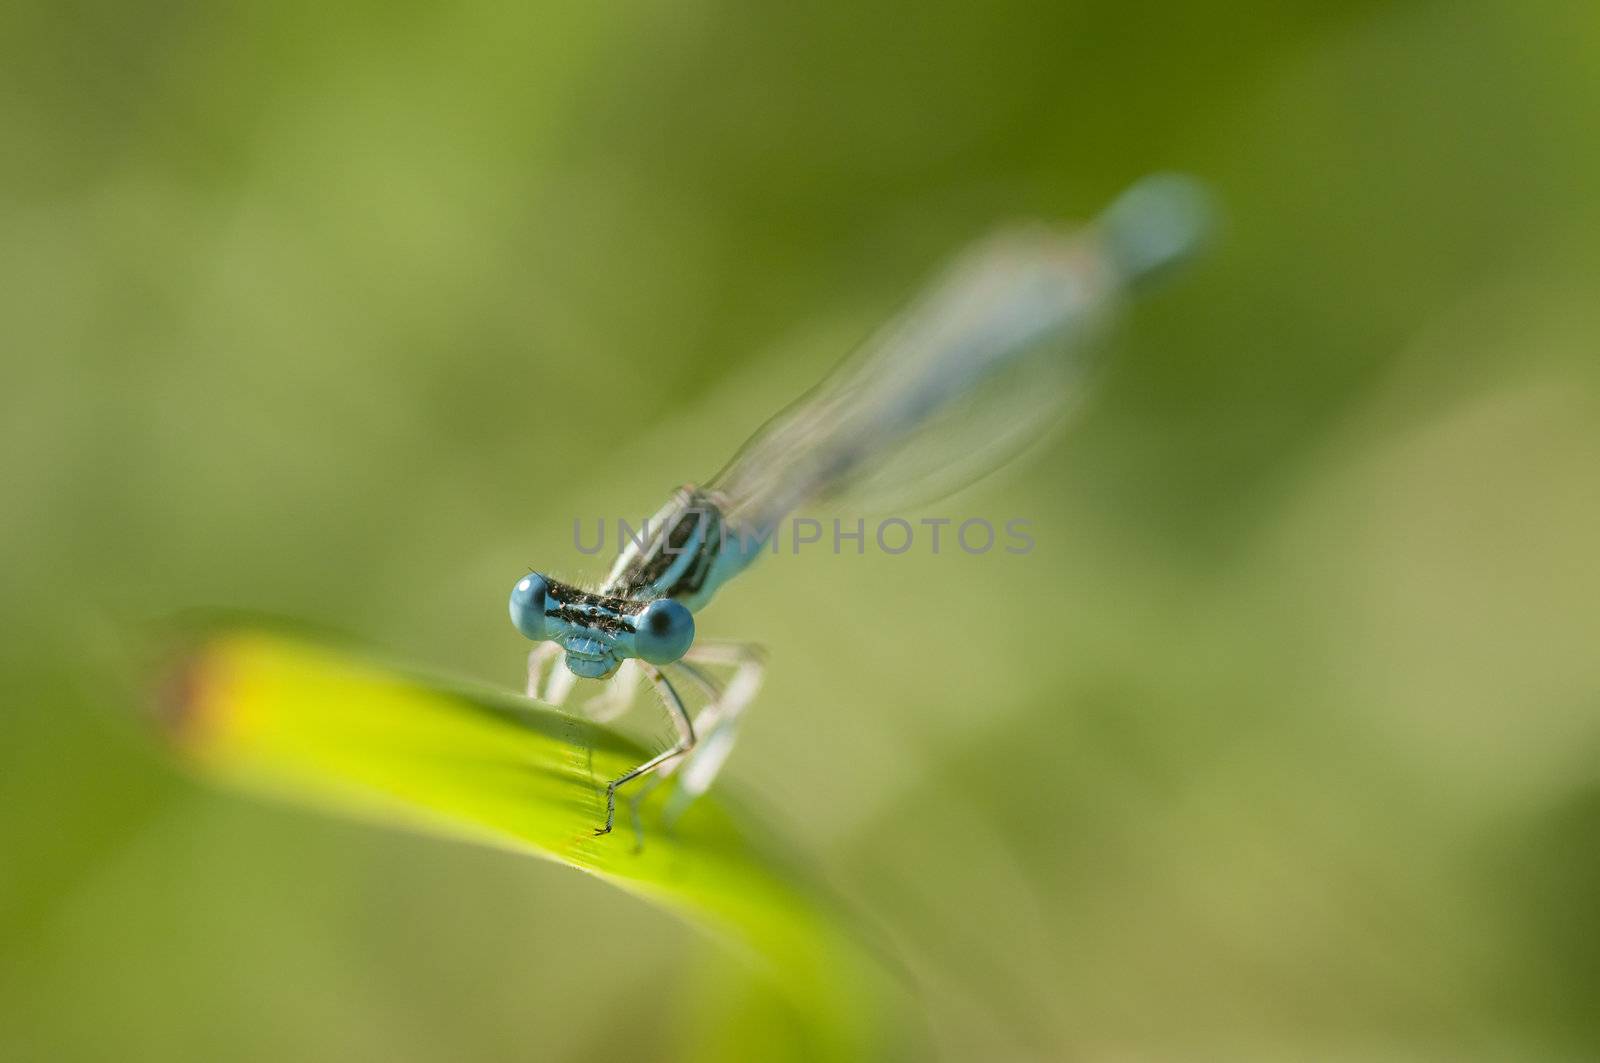 Blue damselfly perched on a blade of grass